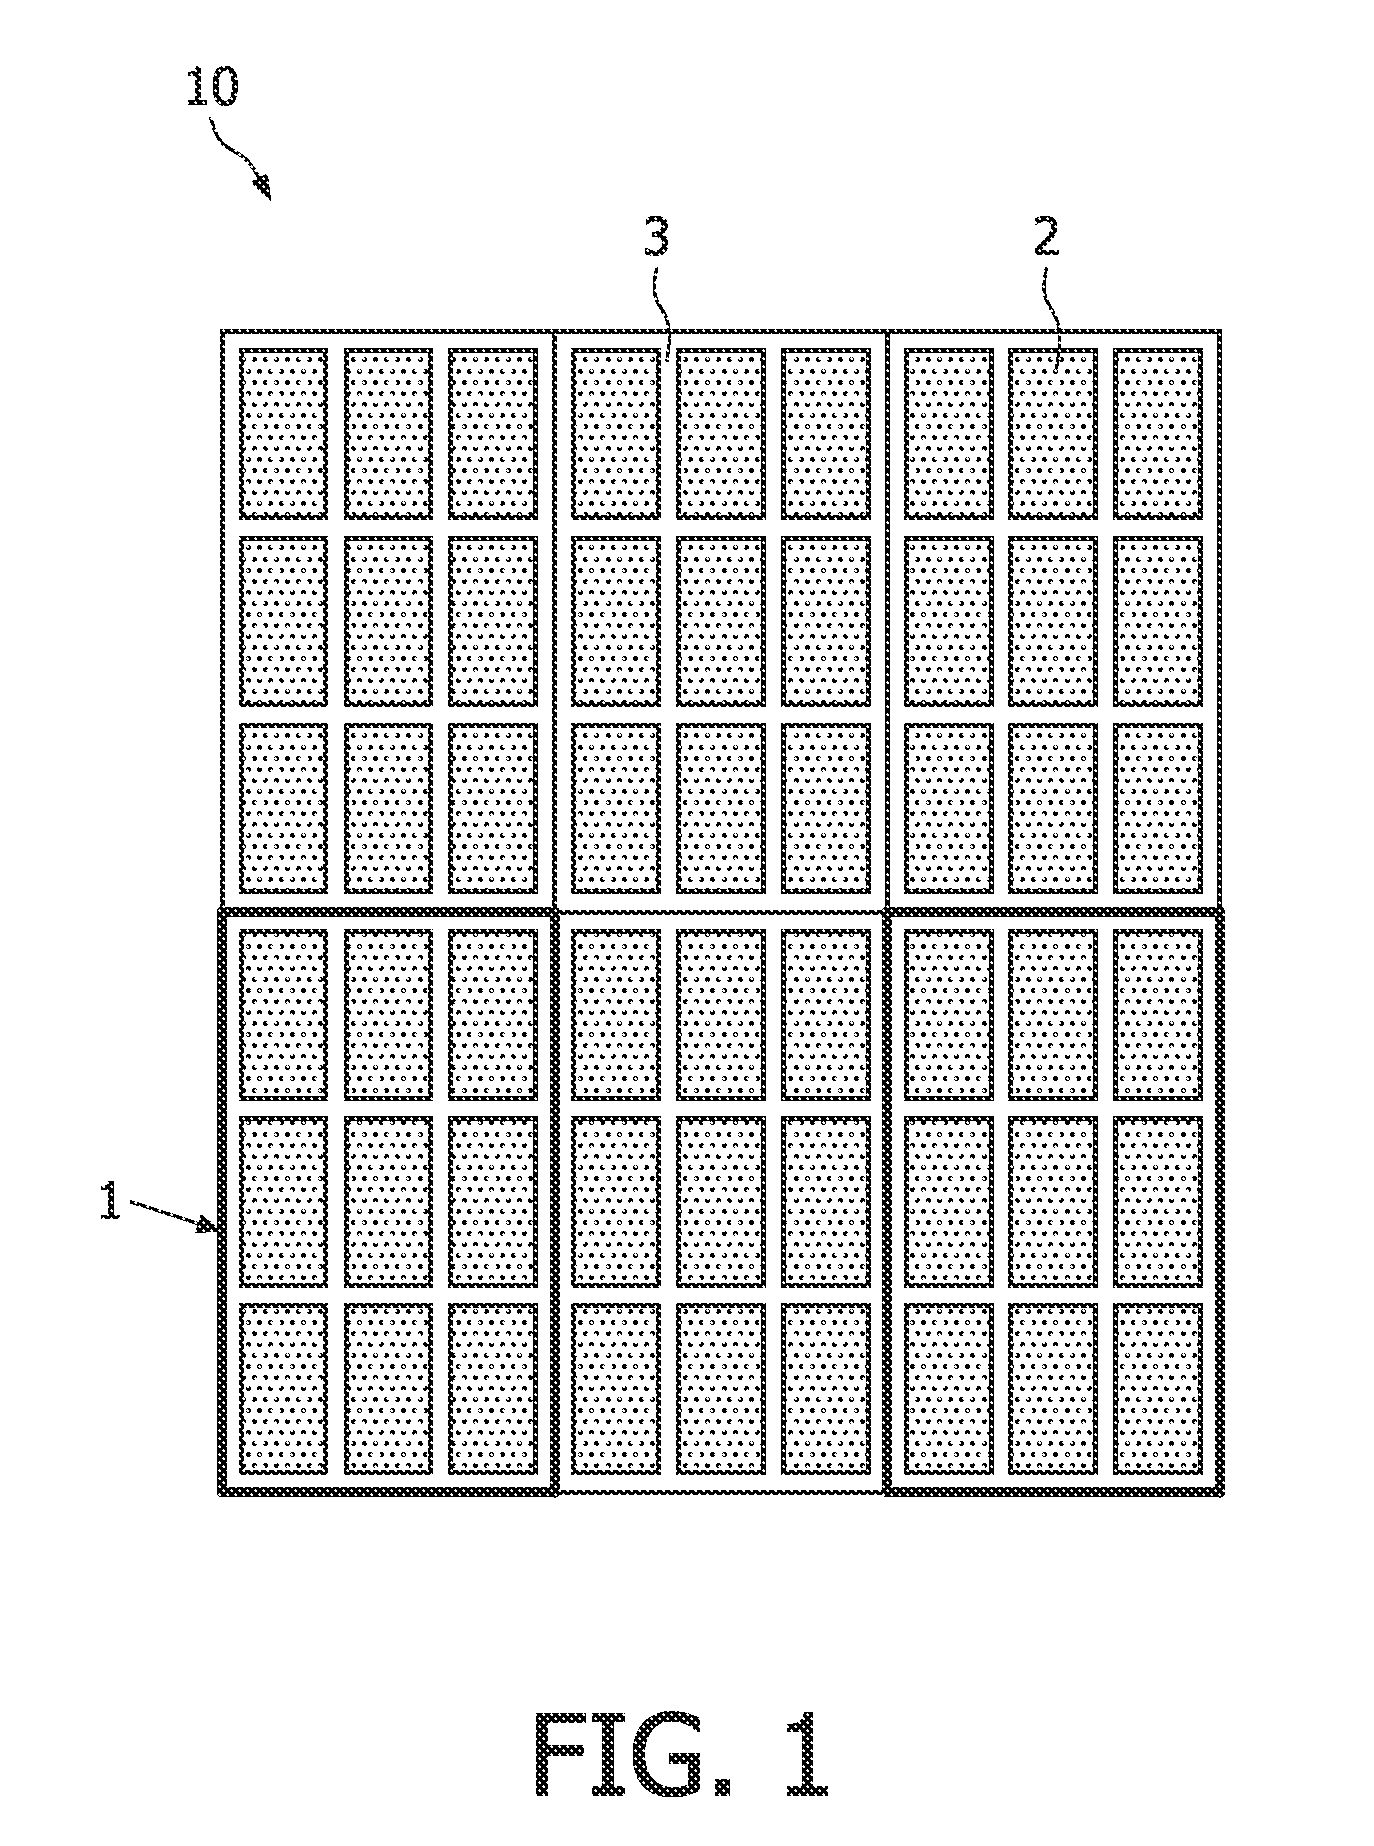 Radiation detection and a method of manufacturing a radiation detector